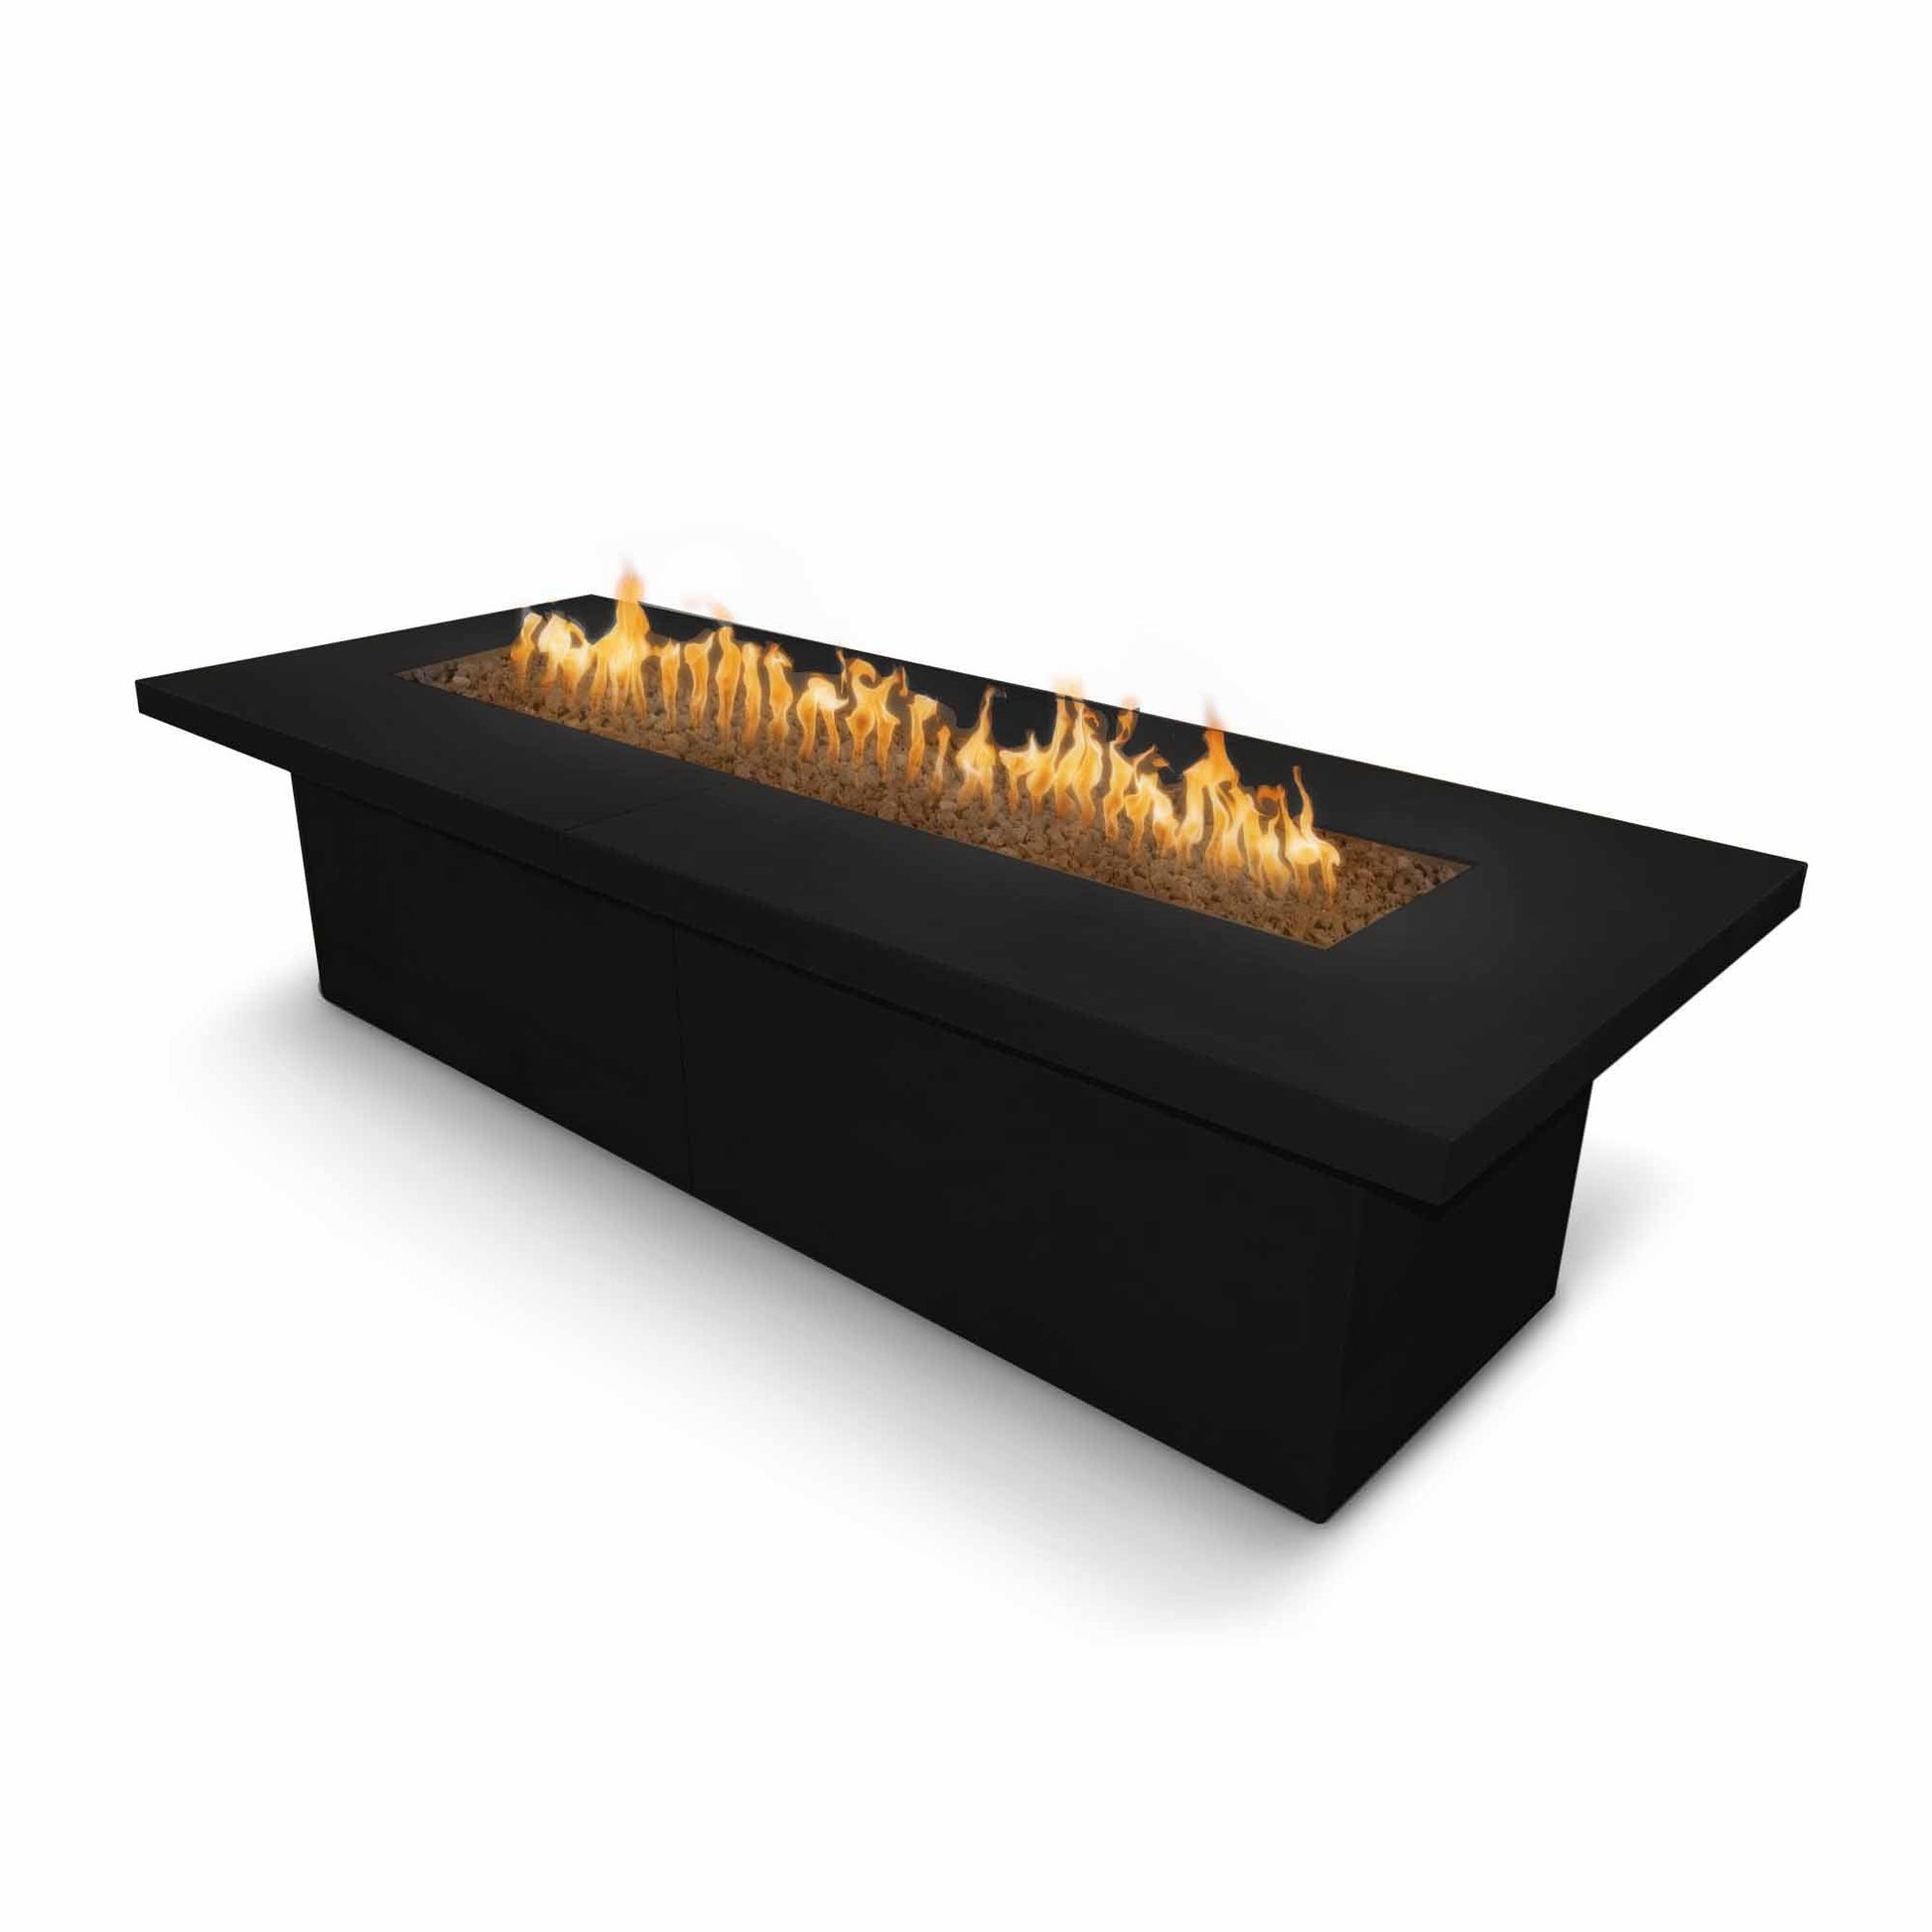 The Outdoor Plus Rectangular Newport 72" Copper Vein Powder Coated Metal Liquid Propane Fire Pit with Match Lit with Flame Sense Ignition